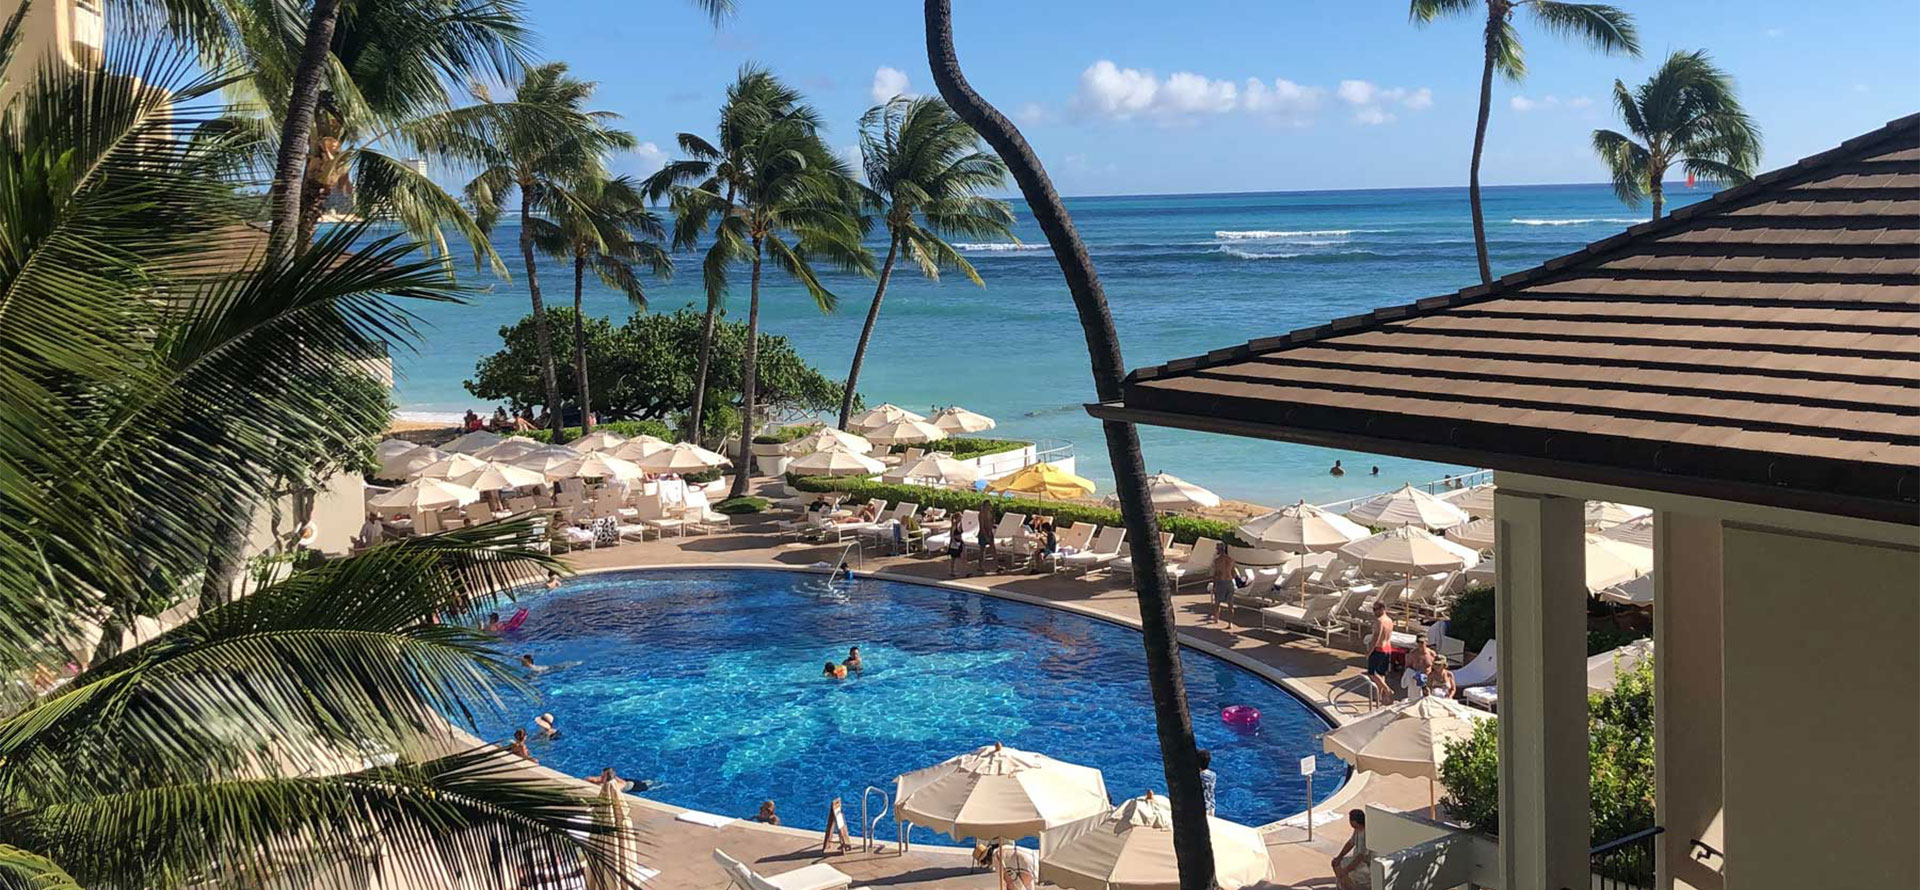 Hawaii all inclusive family resort and swimming pool.